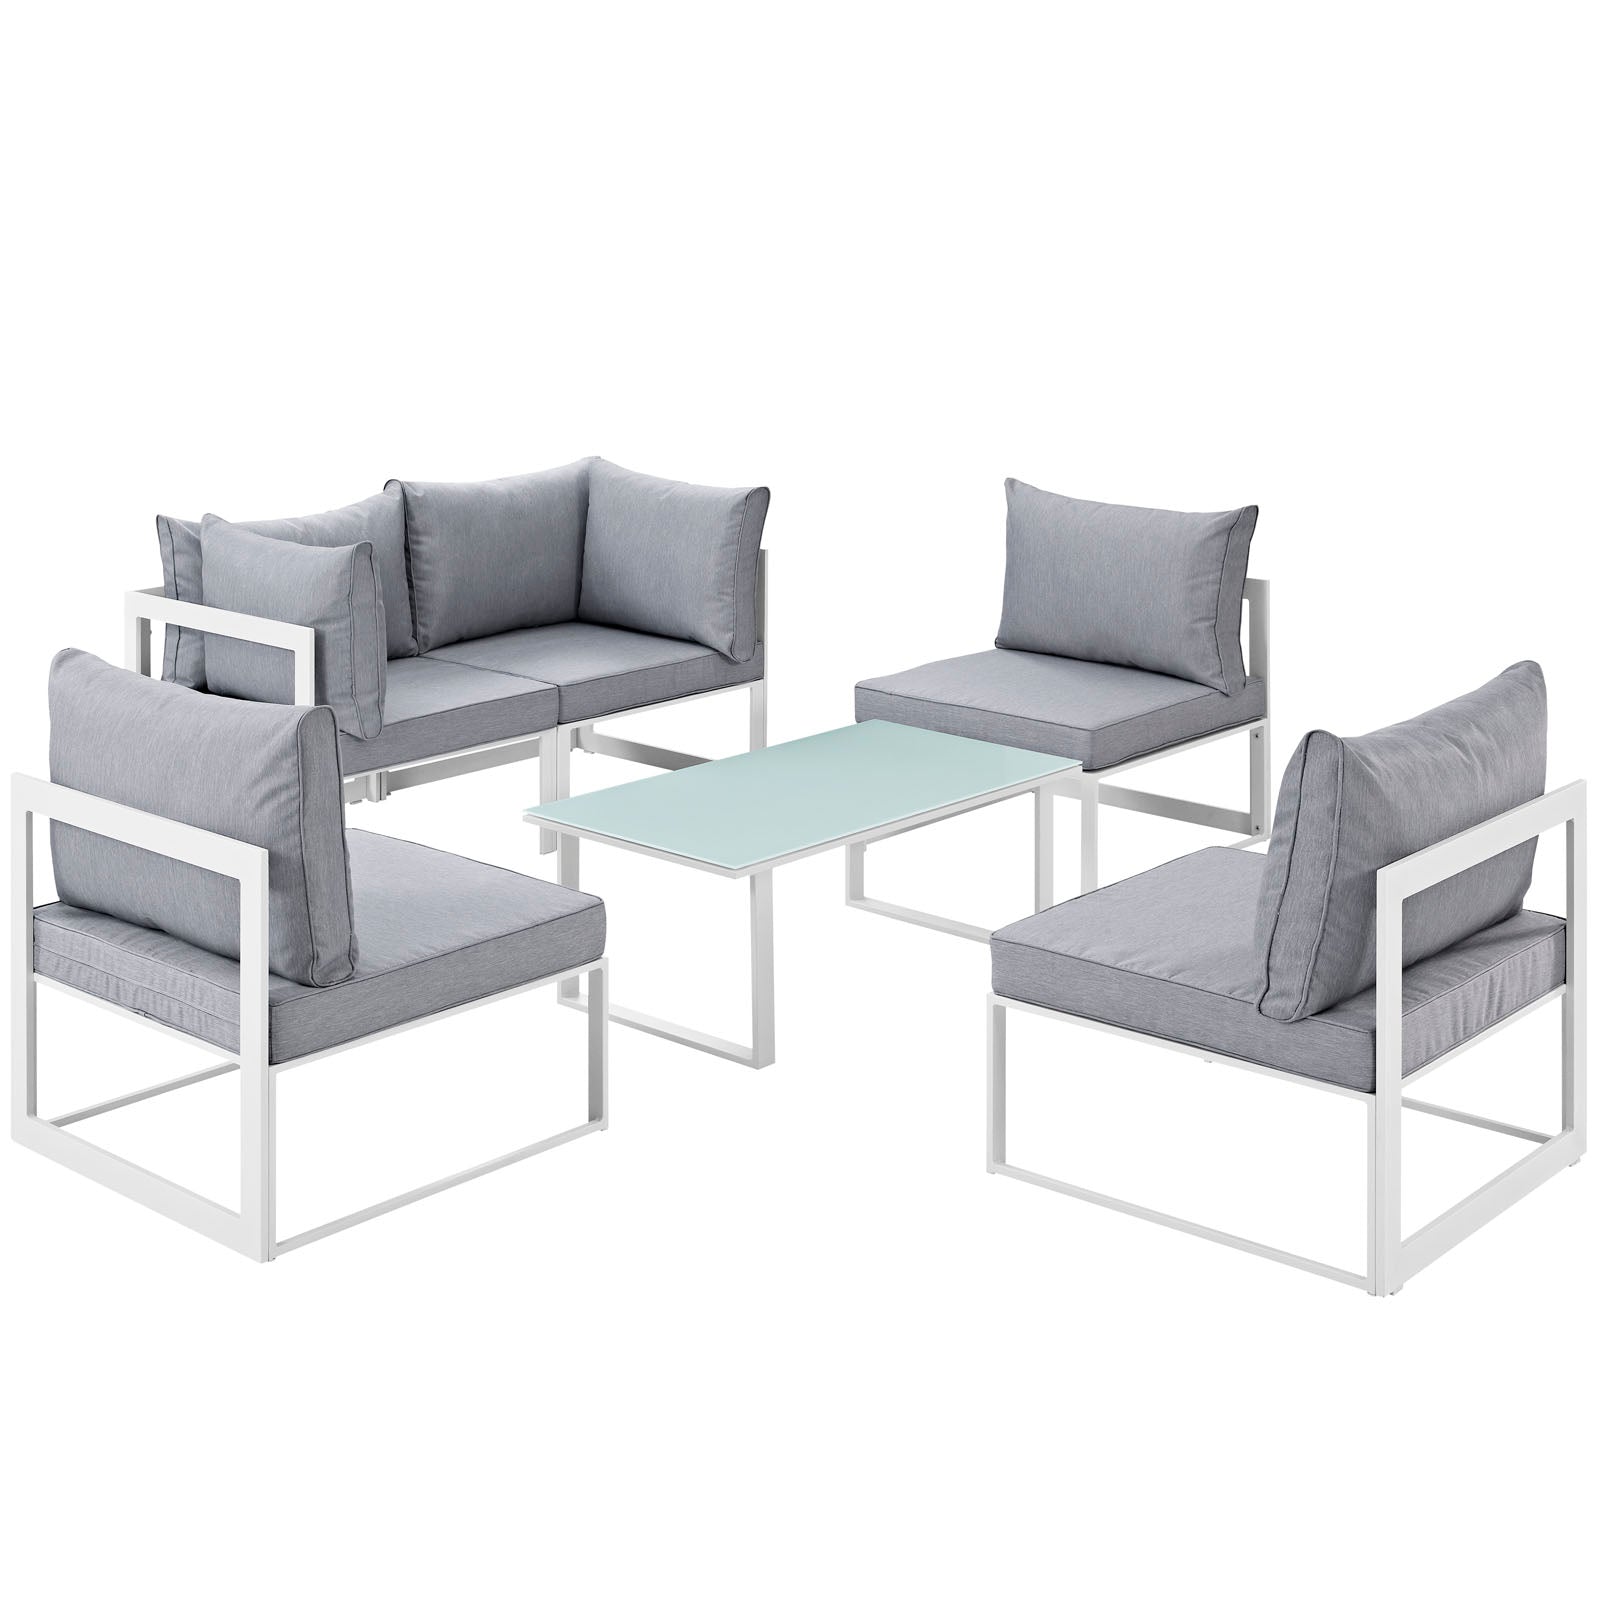 Modway Outdoor Conversation Sets - Fortuna 6 Piece Outdoor Patio Sectional Sofa Set White & Gray